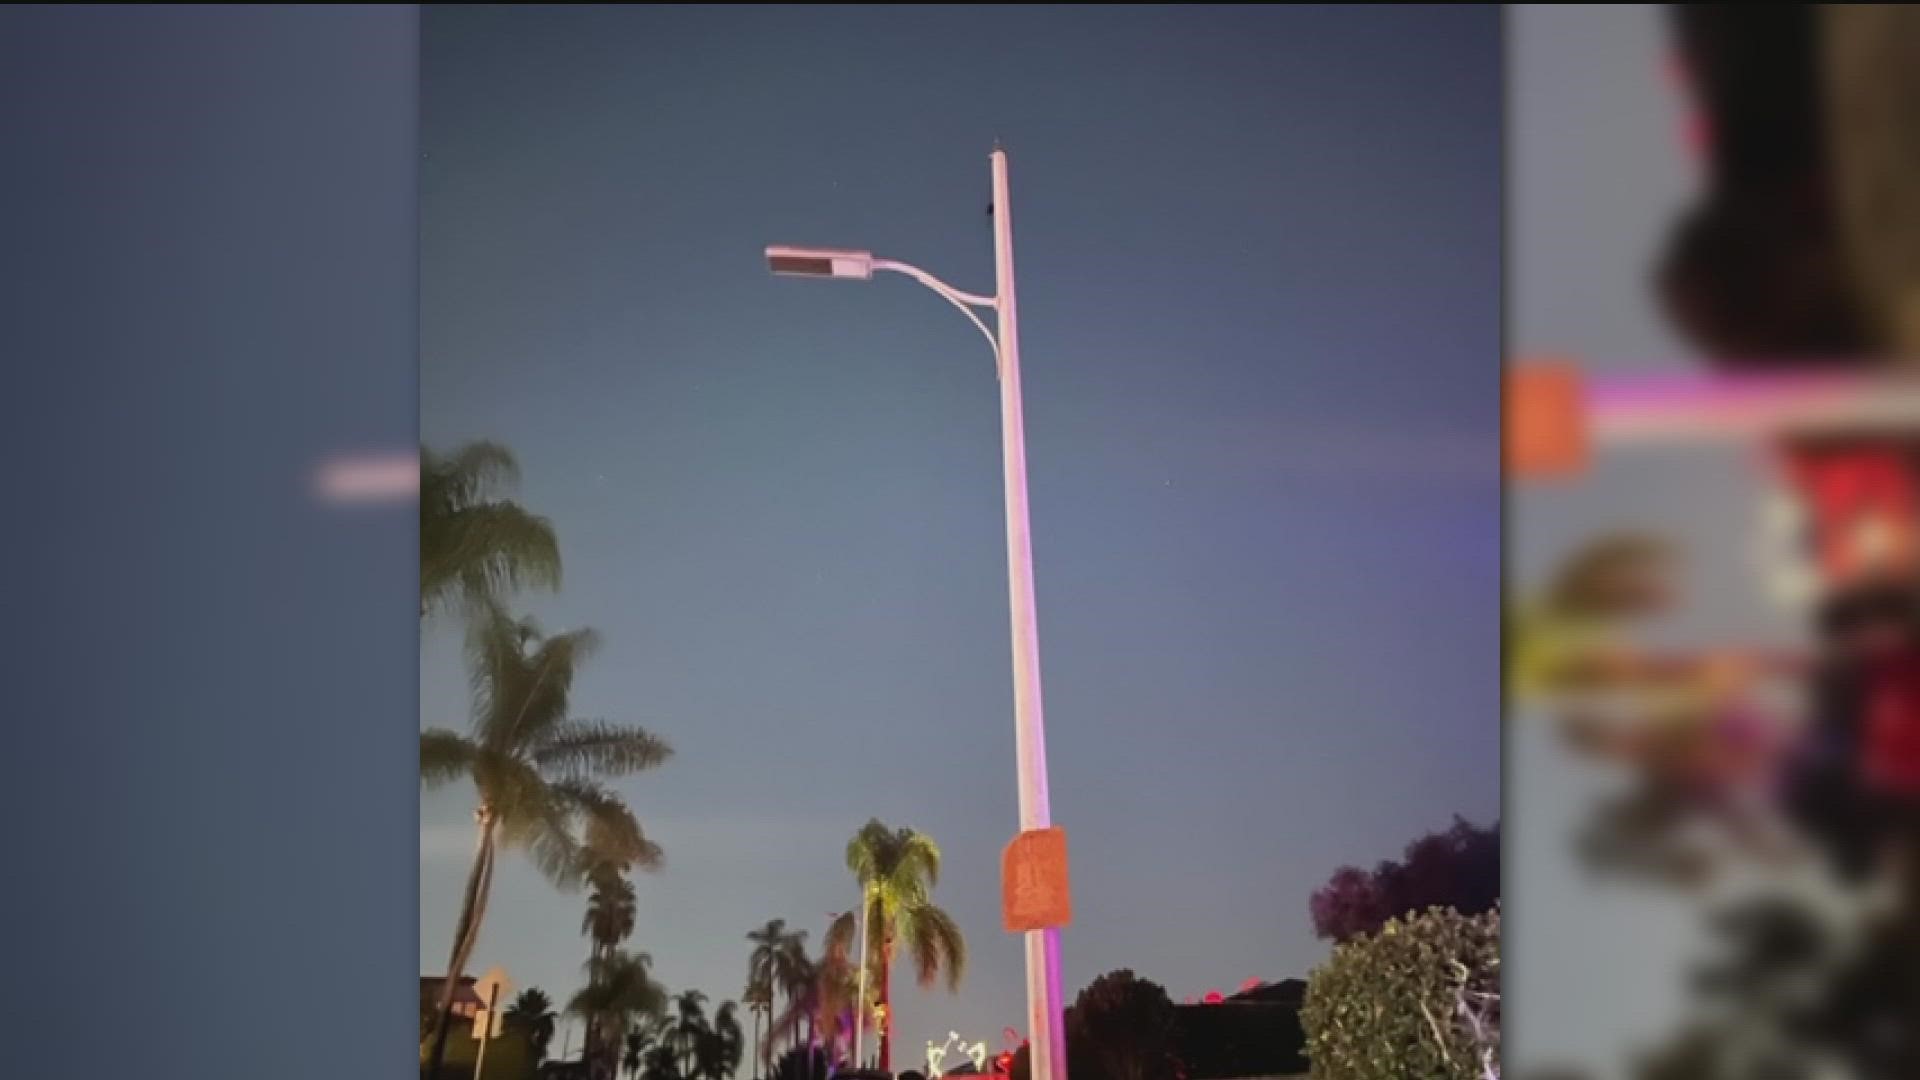 CBS 8 is Working for You to help get a neighborhood's streetlights repaired after residents in Rolando said they've been left in the dark for years.